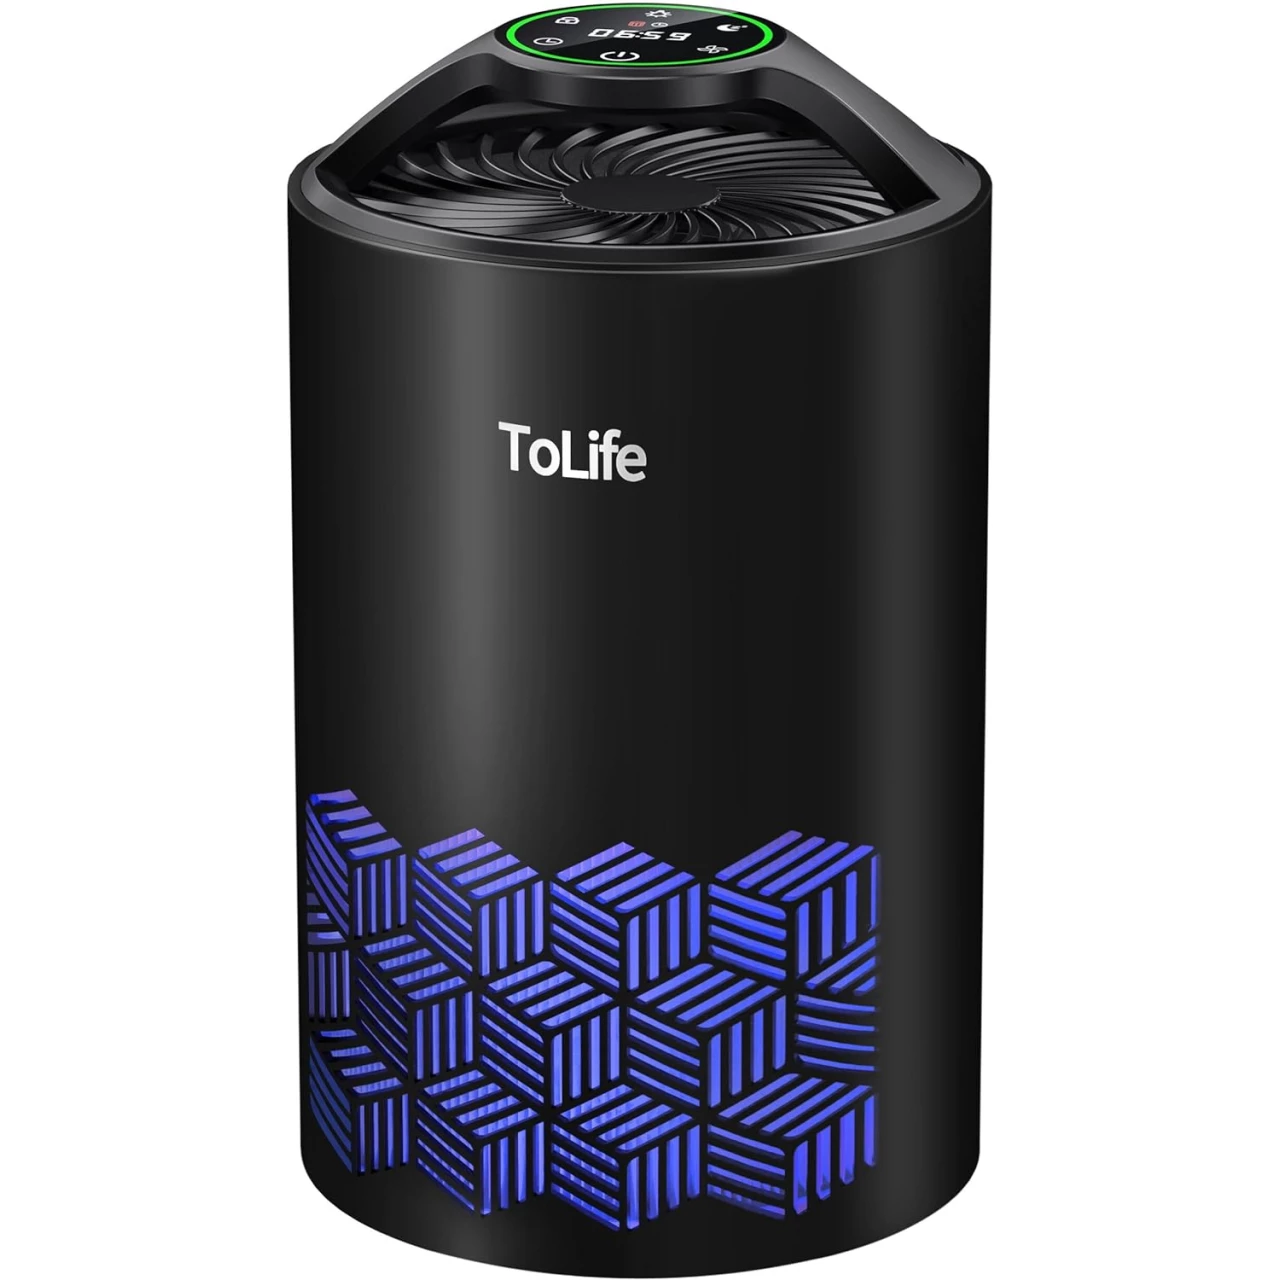 ToLife Air Purifiers for Bedroom, HEPA Air Purifier for Home, Air Cleaner, Portable Air Purifier with Low Noise Sleep Mode for Desktop Office, Black